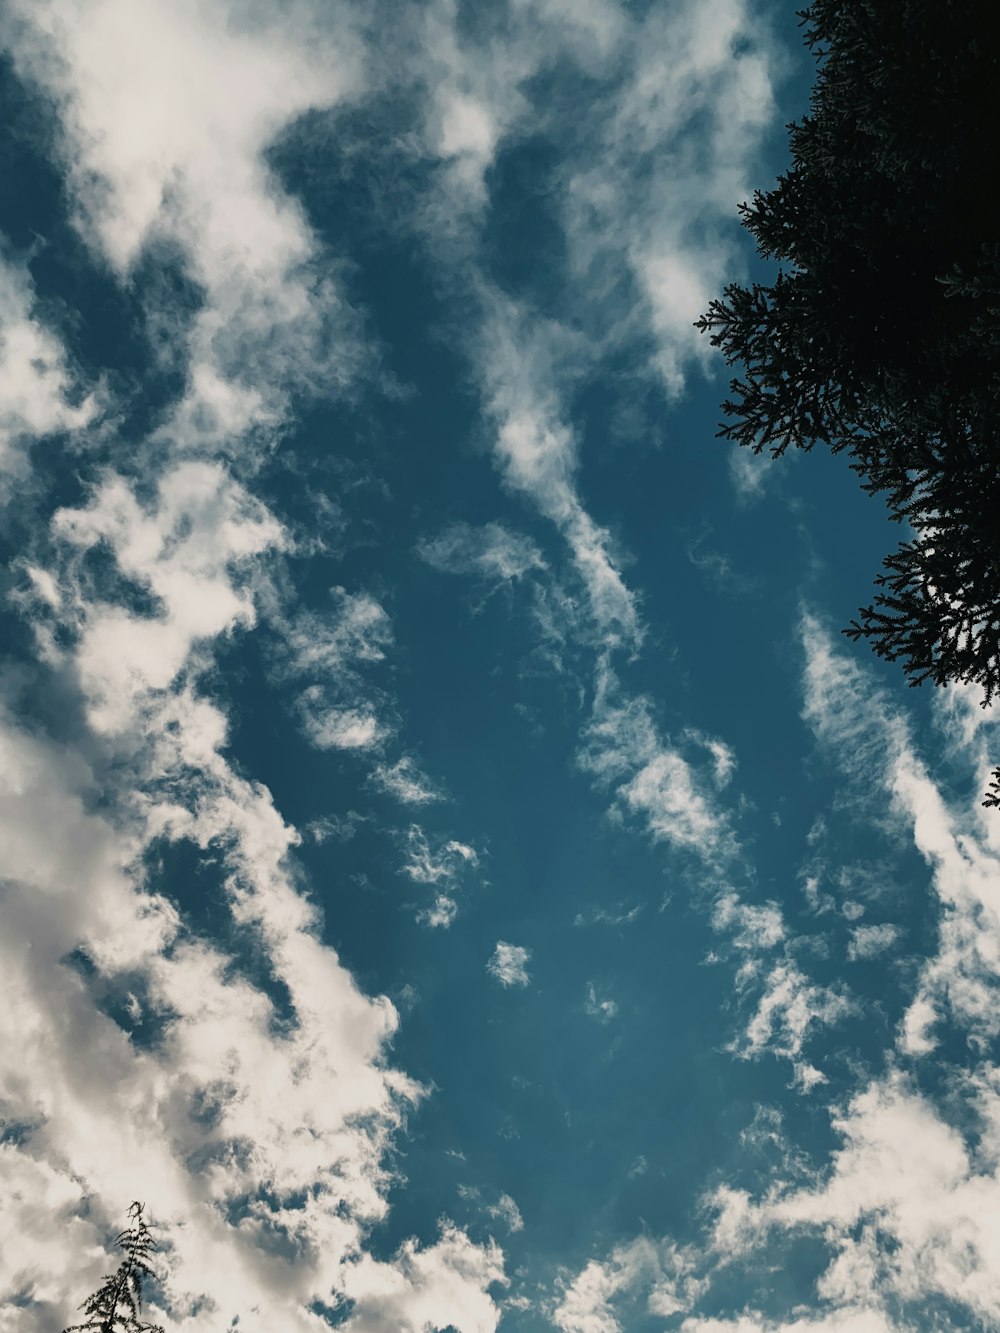 a blue sky filled with clouds and trees